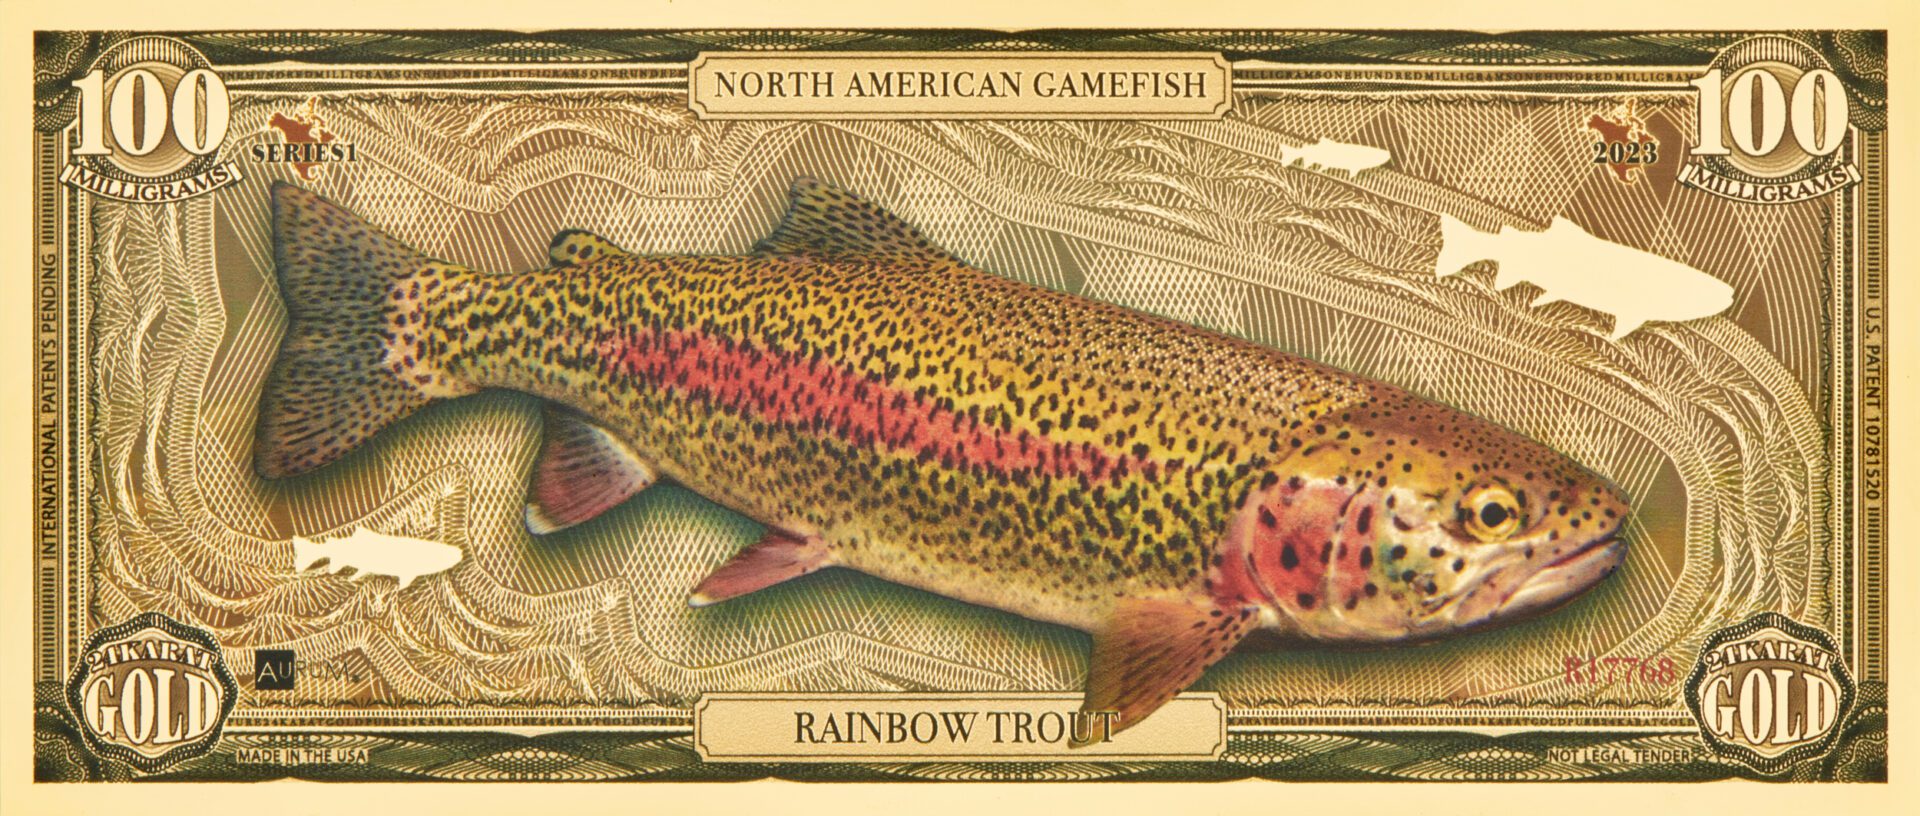 The front of a North American Gamefish Rainbow Trout Gold Bill.